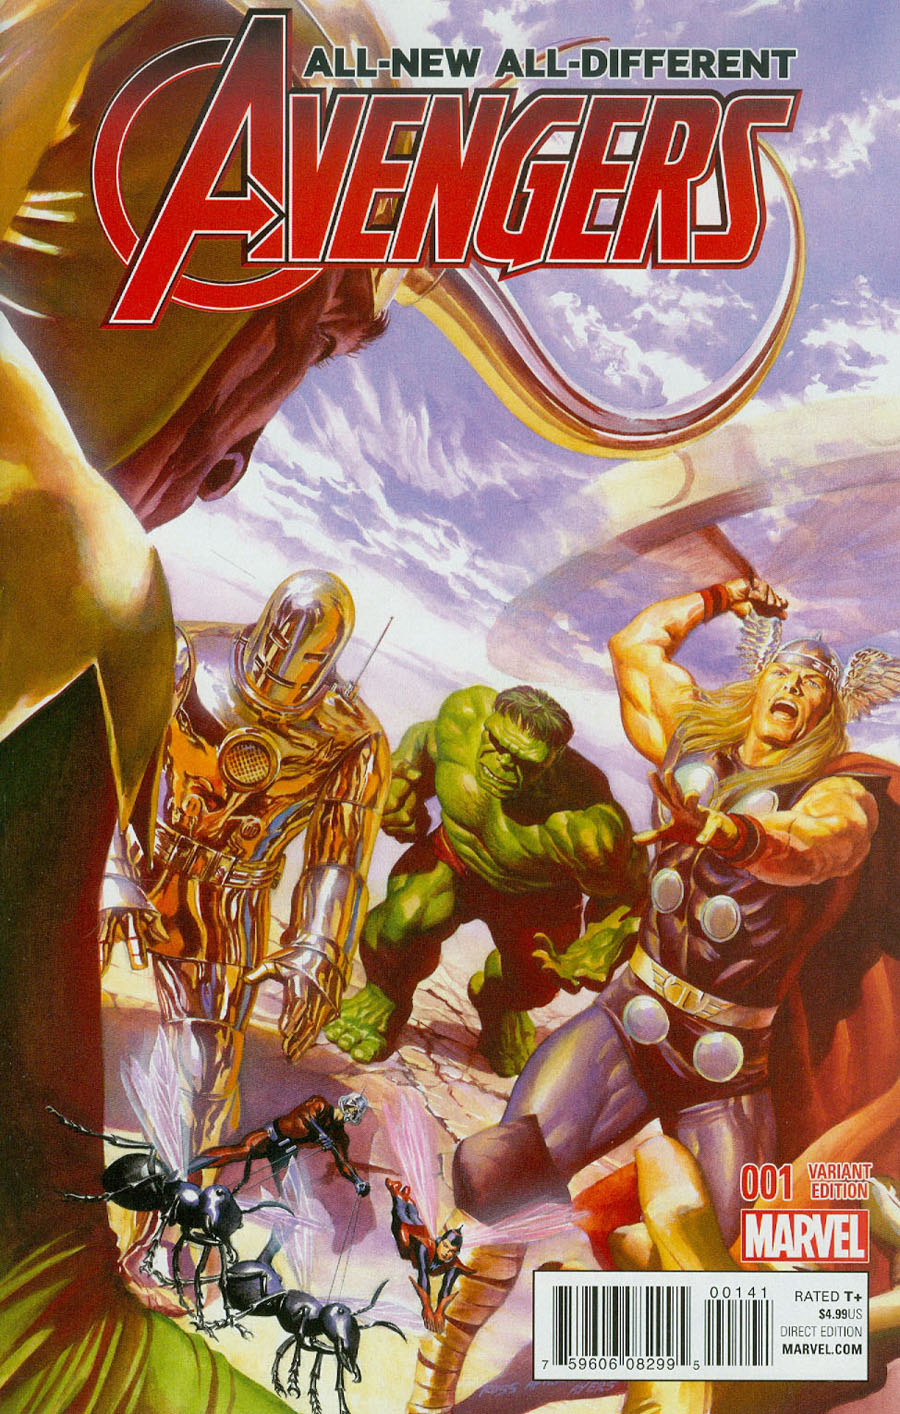 All-New All-Different Avengers #1 Cover G Incentive Alex Ross Vintage Color Variant Cover